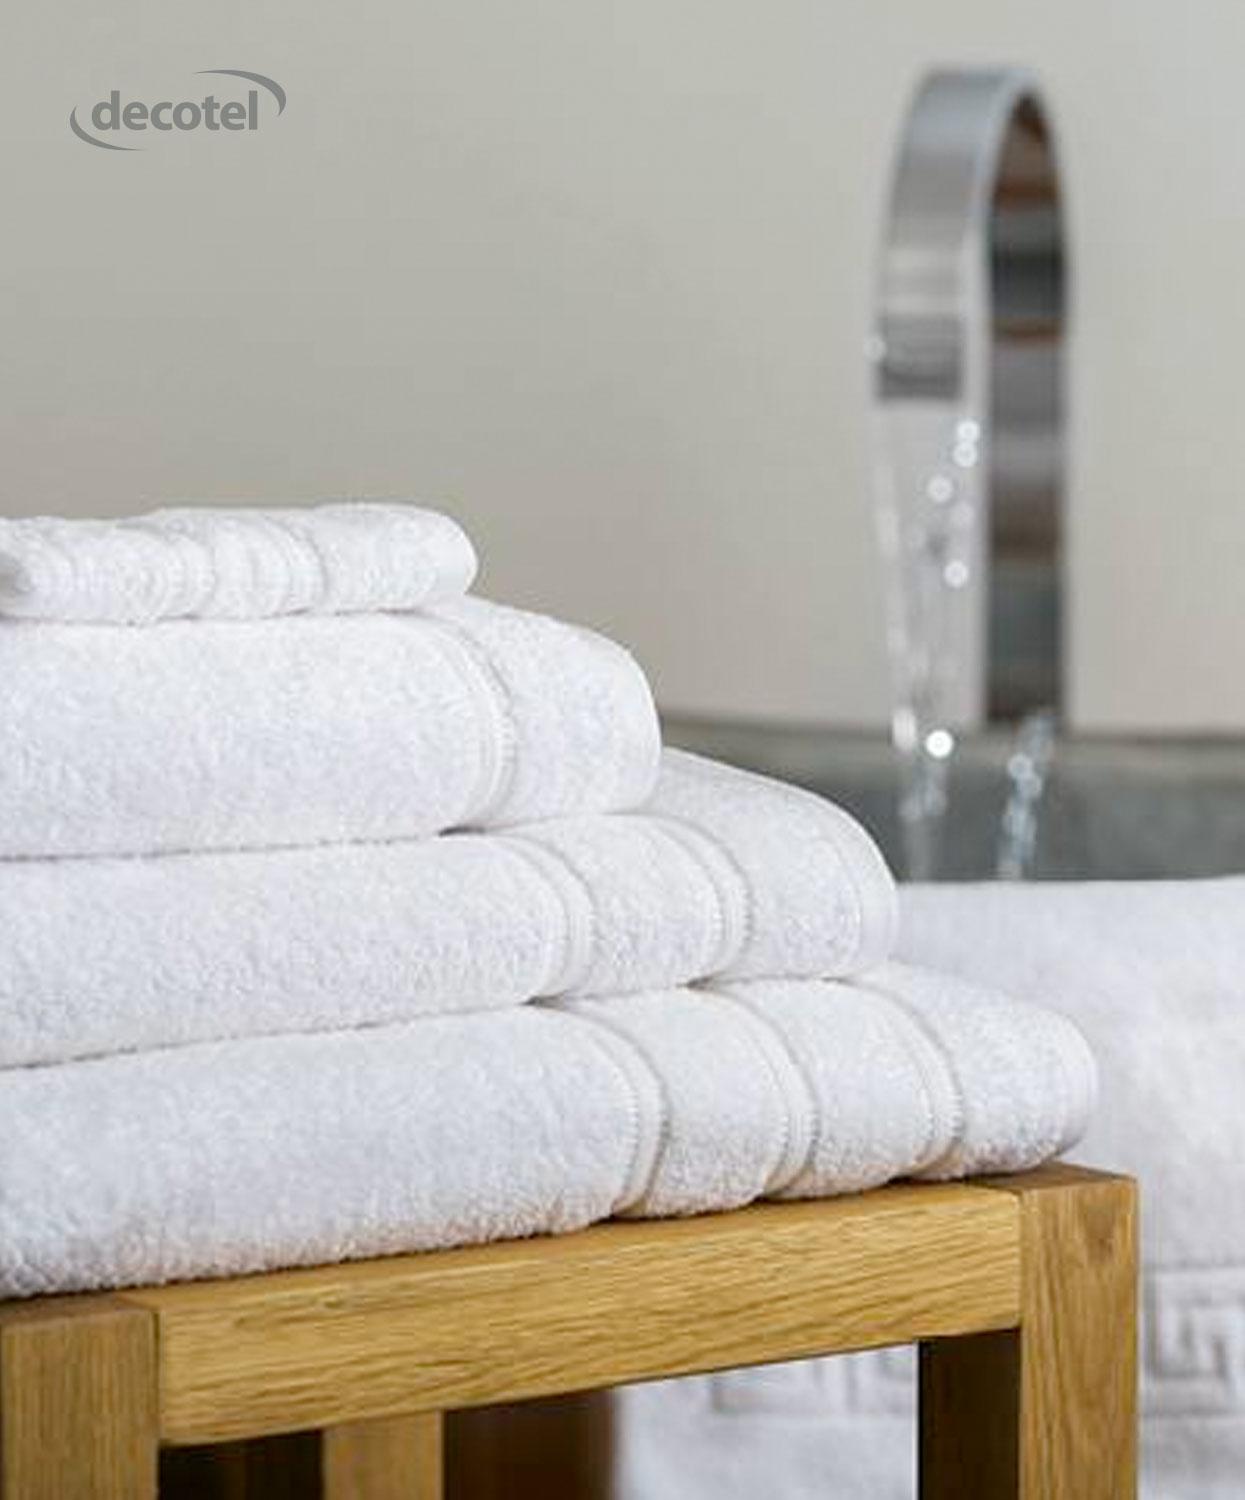 Bathroom towels from Star Linen